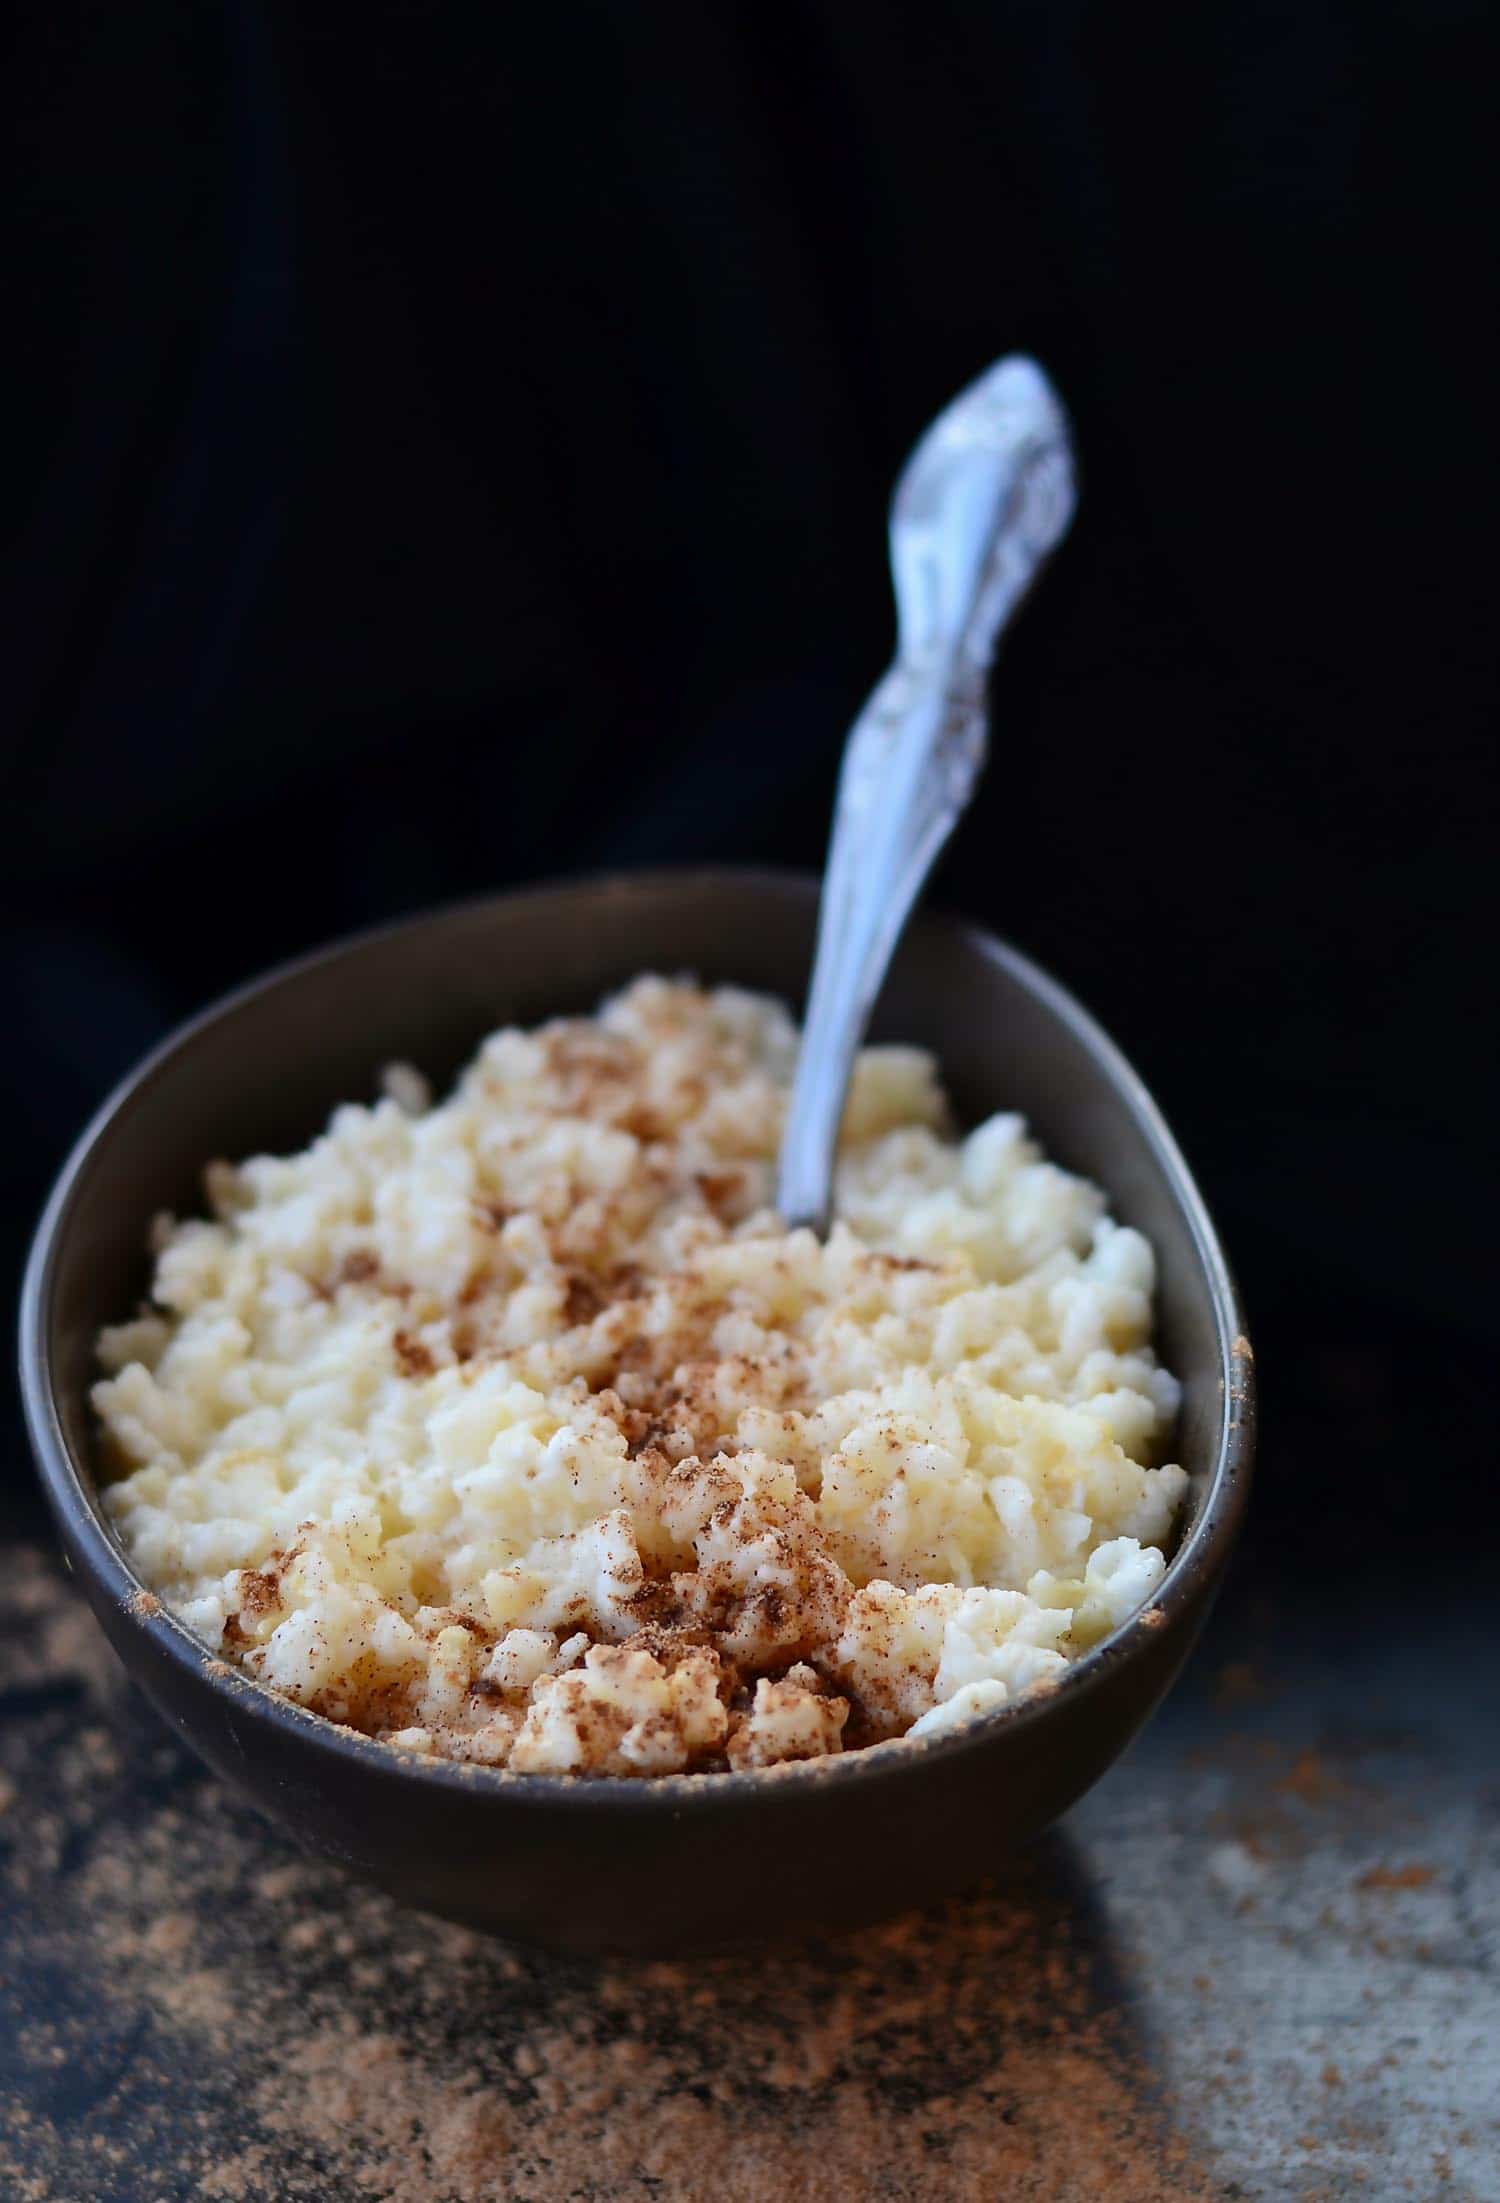 Rice pudding or arroz en leche in Guatemala in a brown bowl with a spoon on a dark background